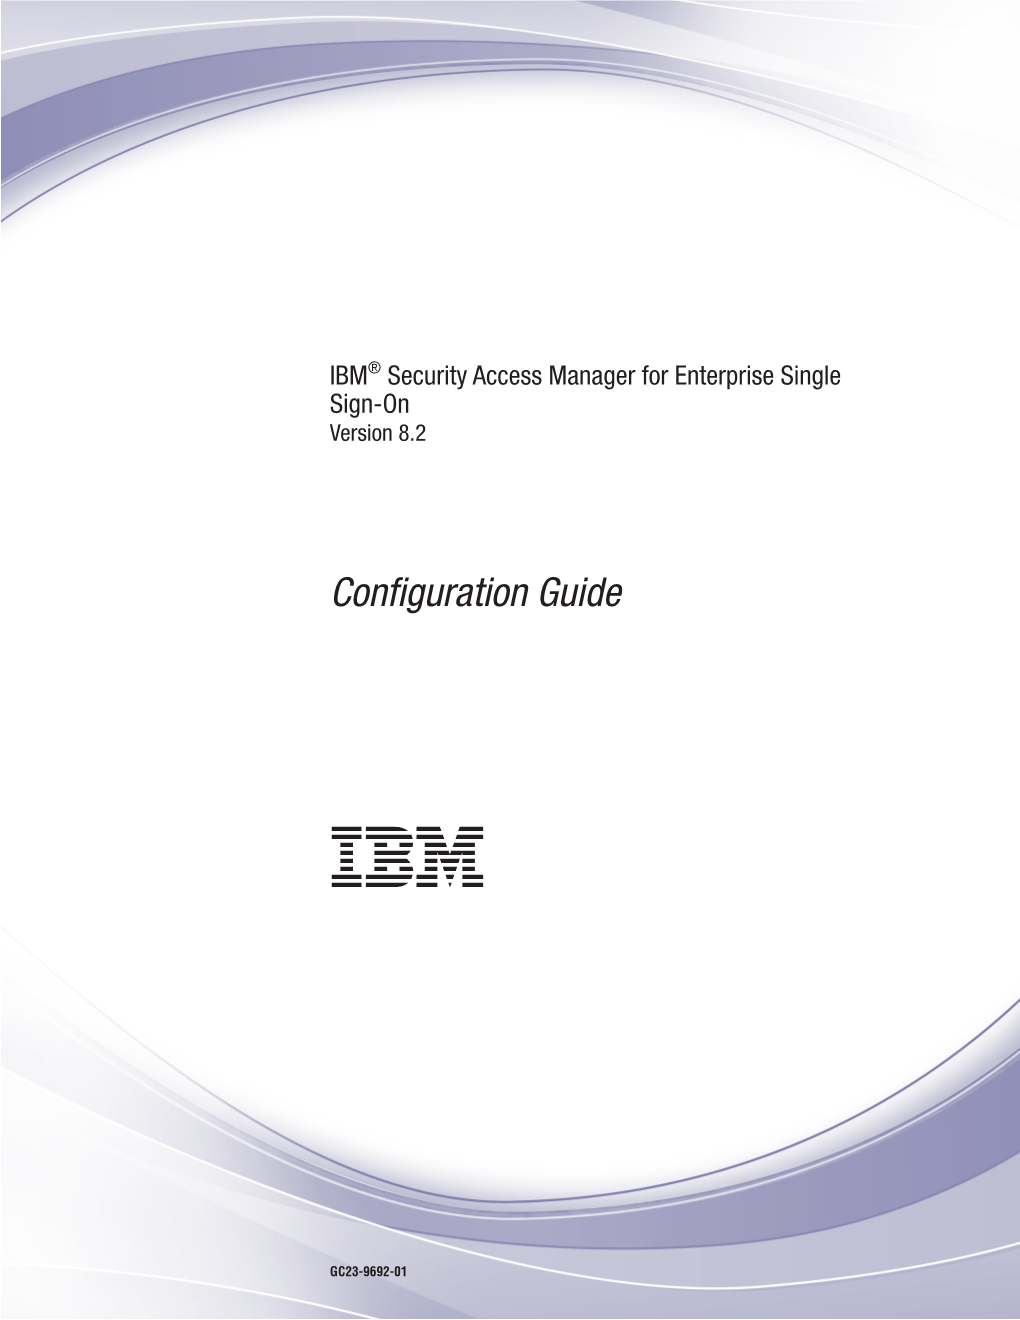 IBM® Security Access Manager for Enterprise Single Sign-On: Configuration Guide About This Publication